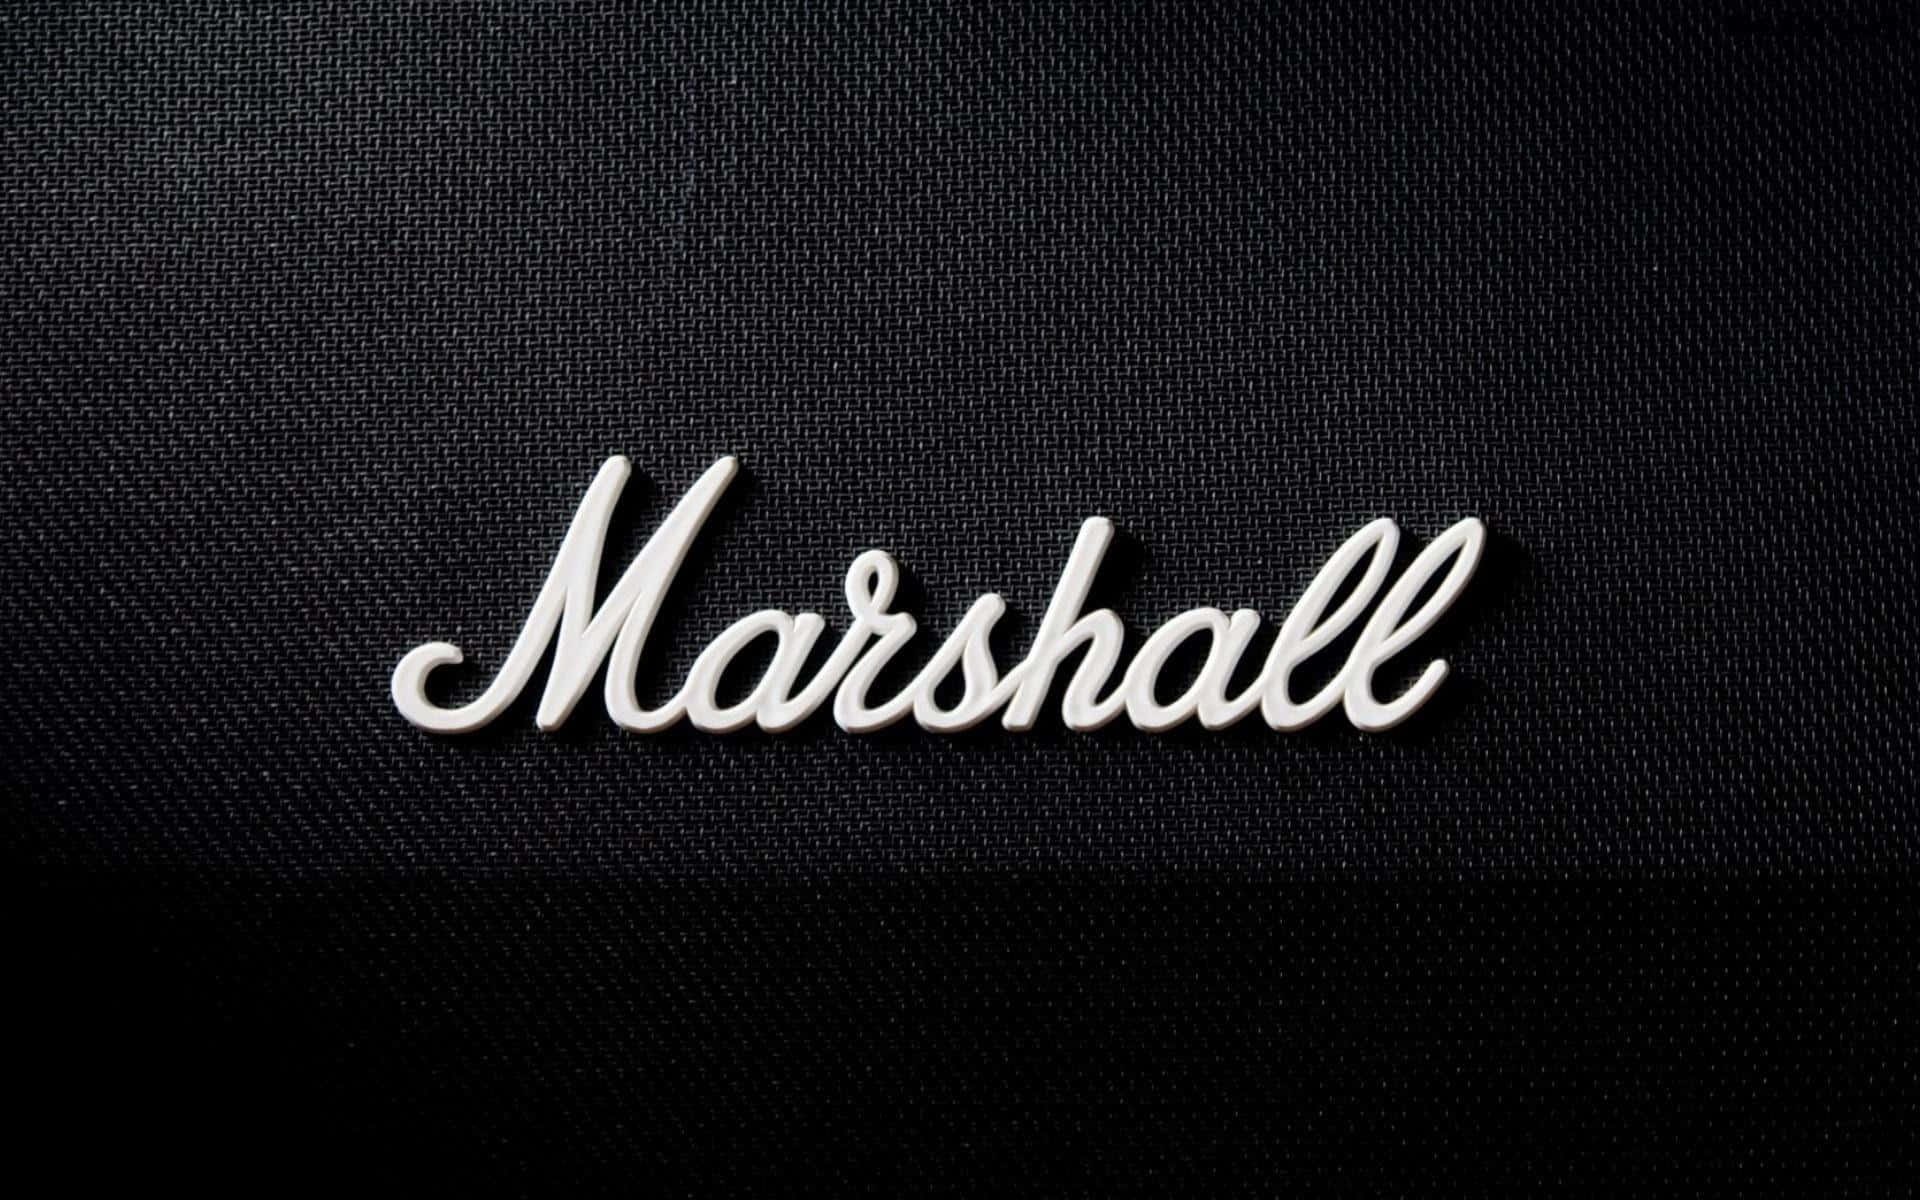 Music meets Technology with Marshall